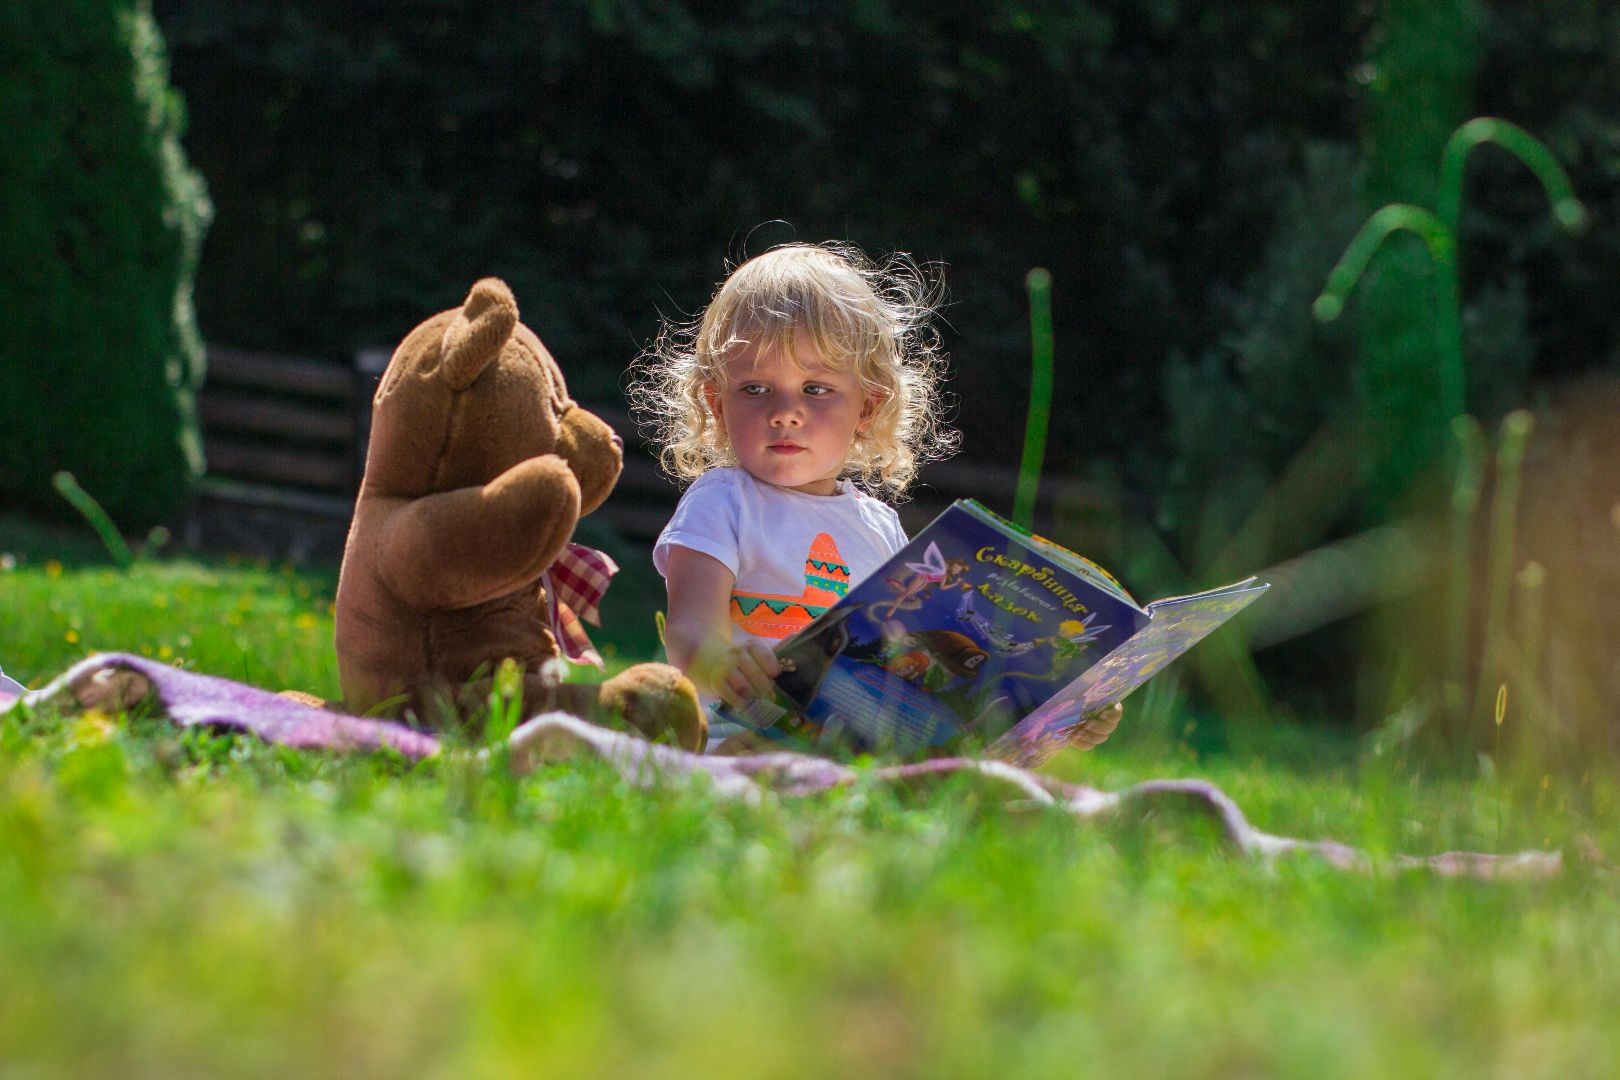 Child in garden with bear and book - photo by Andy Kuzma